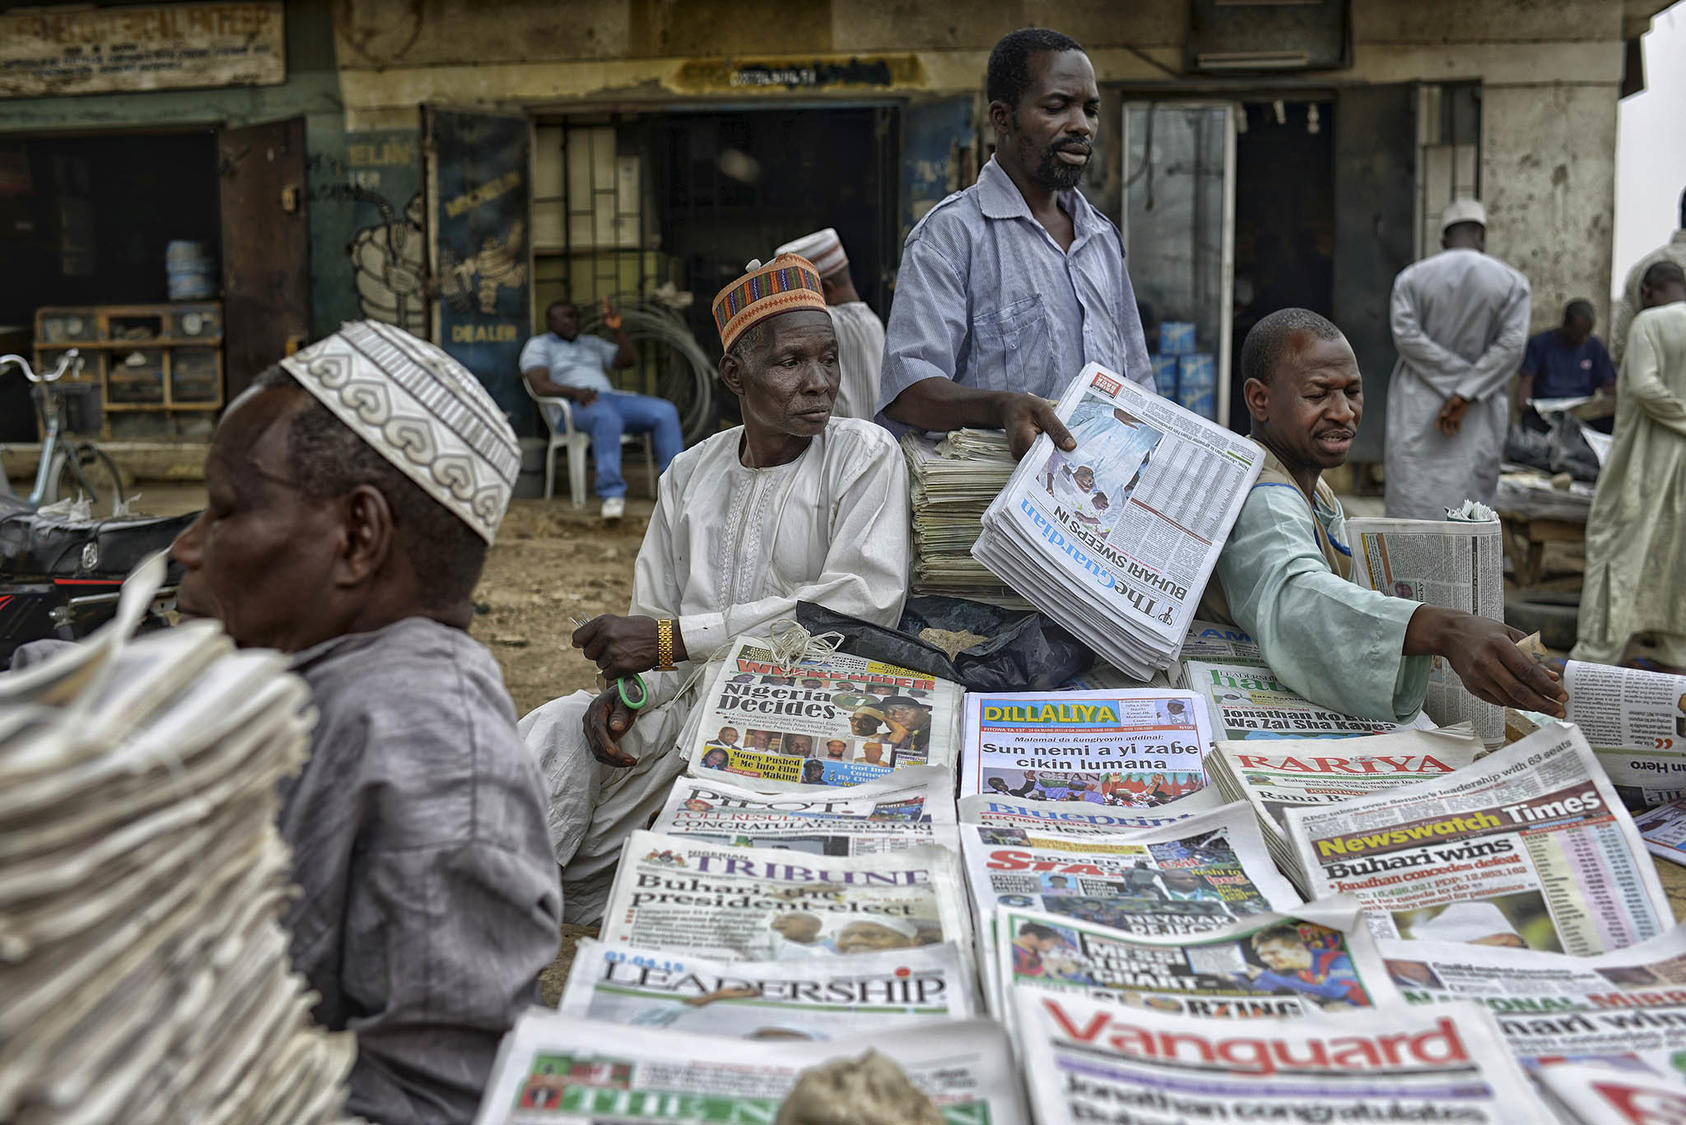 Vendors sold newspapers in 2015 reporting the election then that marked a consolidation of Nigeria’s democracy. Next year’s elections offer opportunity for more democratic progress but will need international support. (Samuel Aranda/The New York Times)